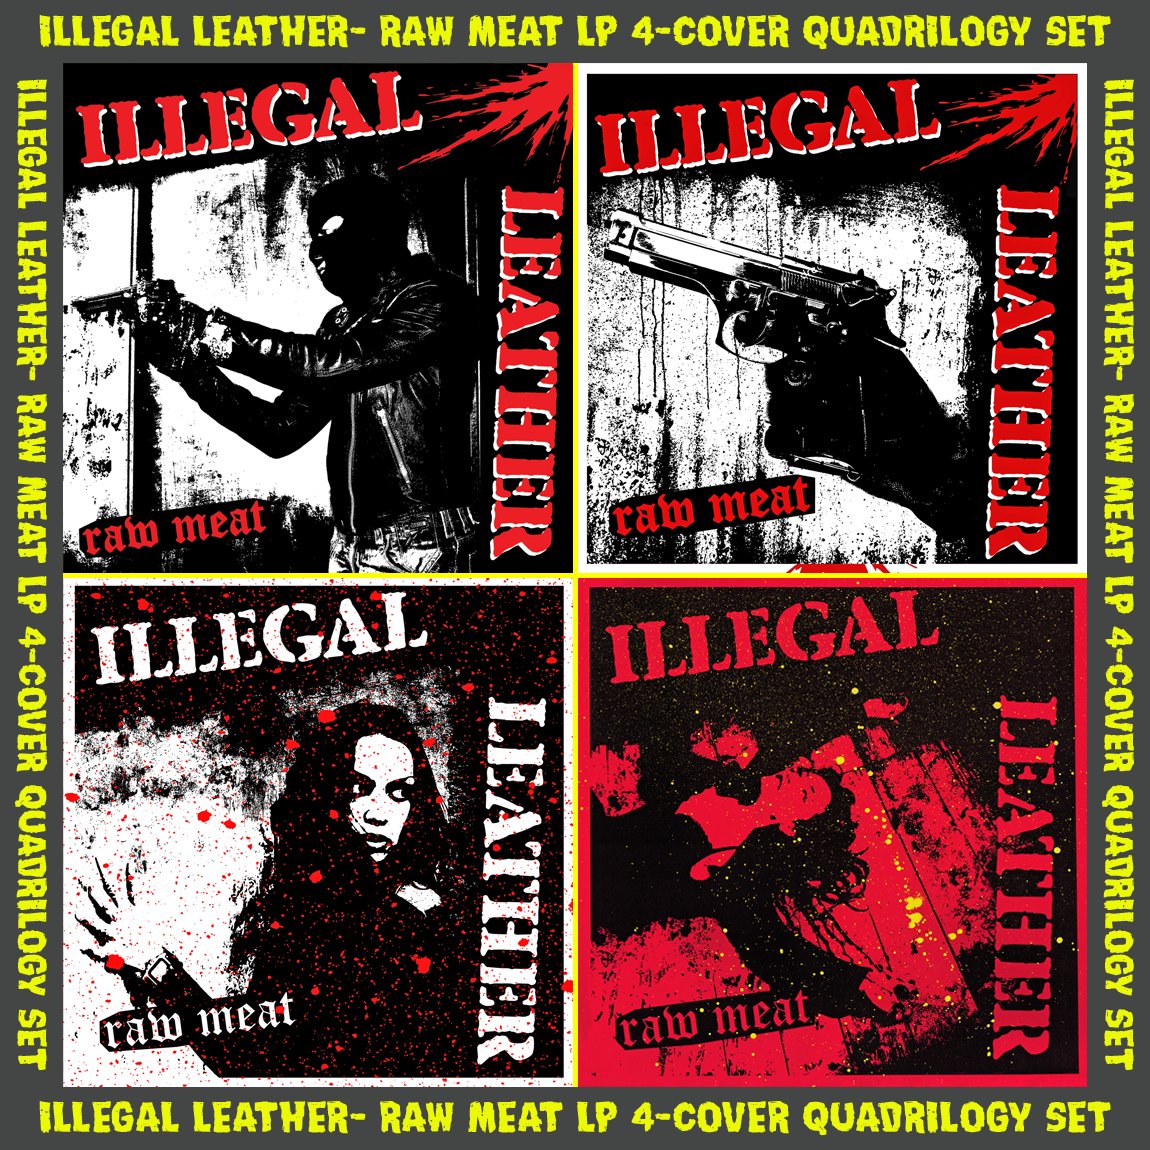 Illegal Leather- Raw Meat LP ~RARE COVER #3 OF 4-COVER QUADRILOGY LTD TO 35 HAND NUMBERED COPIES W/ CUSTOM BLOOD RED SPLATTERS!